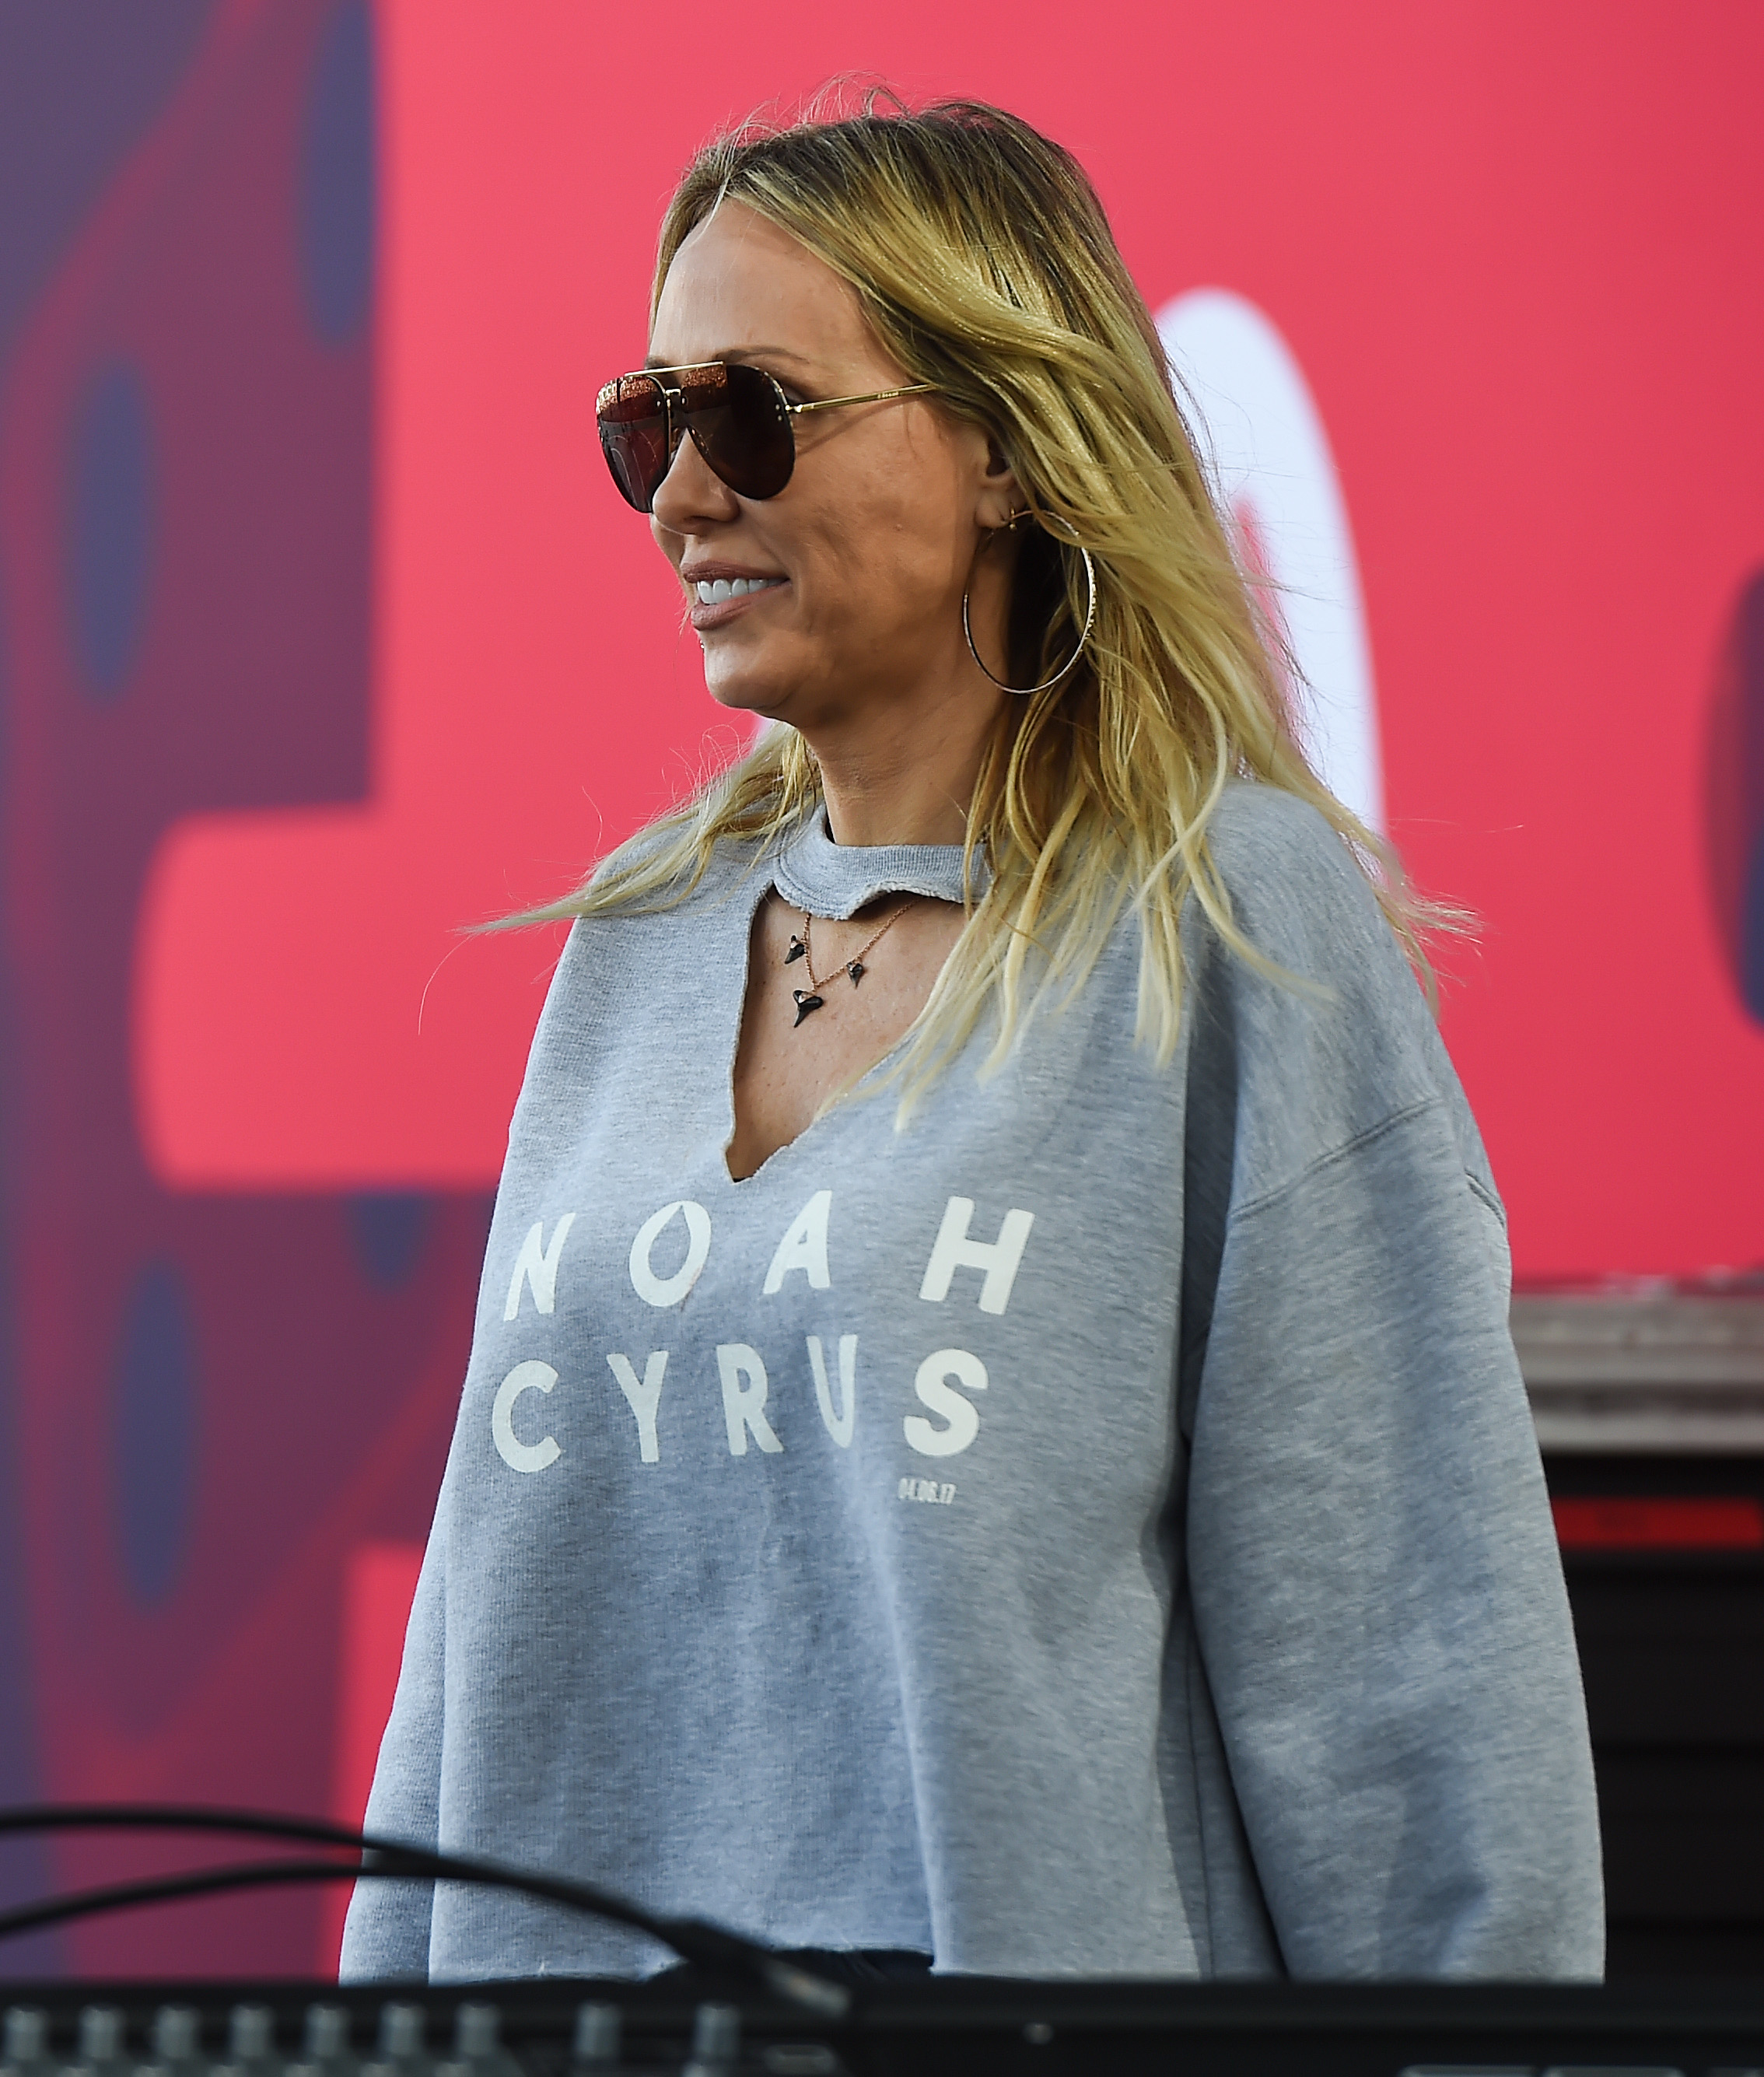 Woman in sweatshirt with &quot;Noah Cyrus&quot; text, standing with microphone, outdoors